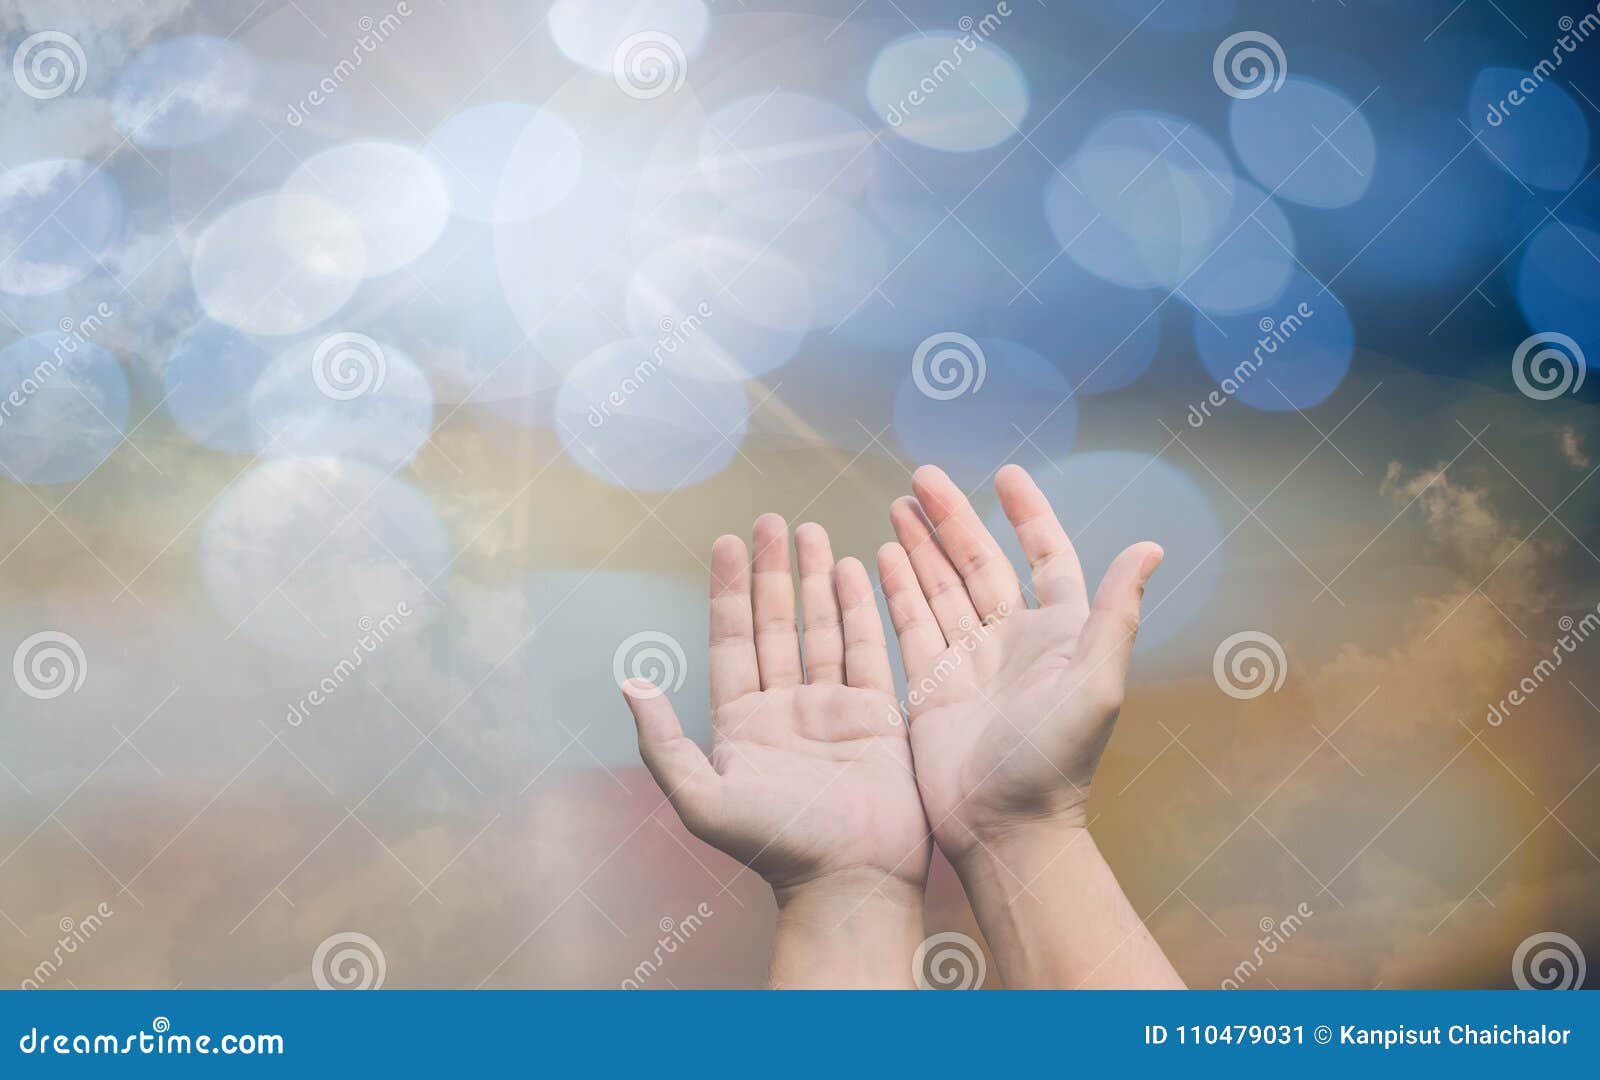 worshipping god concept,people open empty hands with palms up